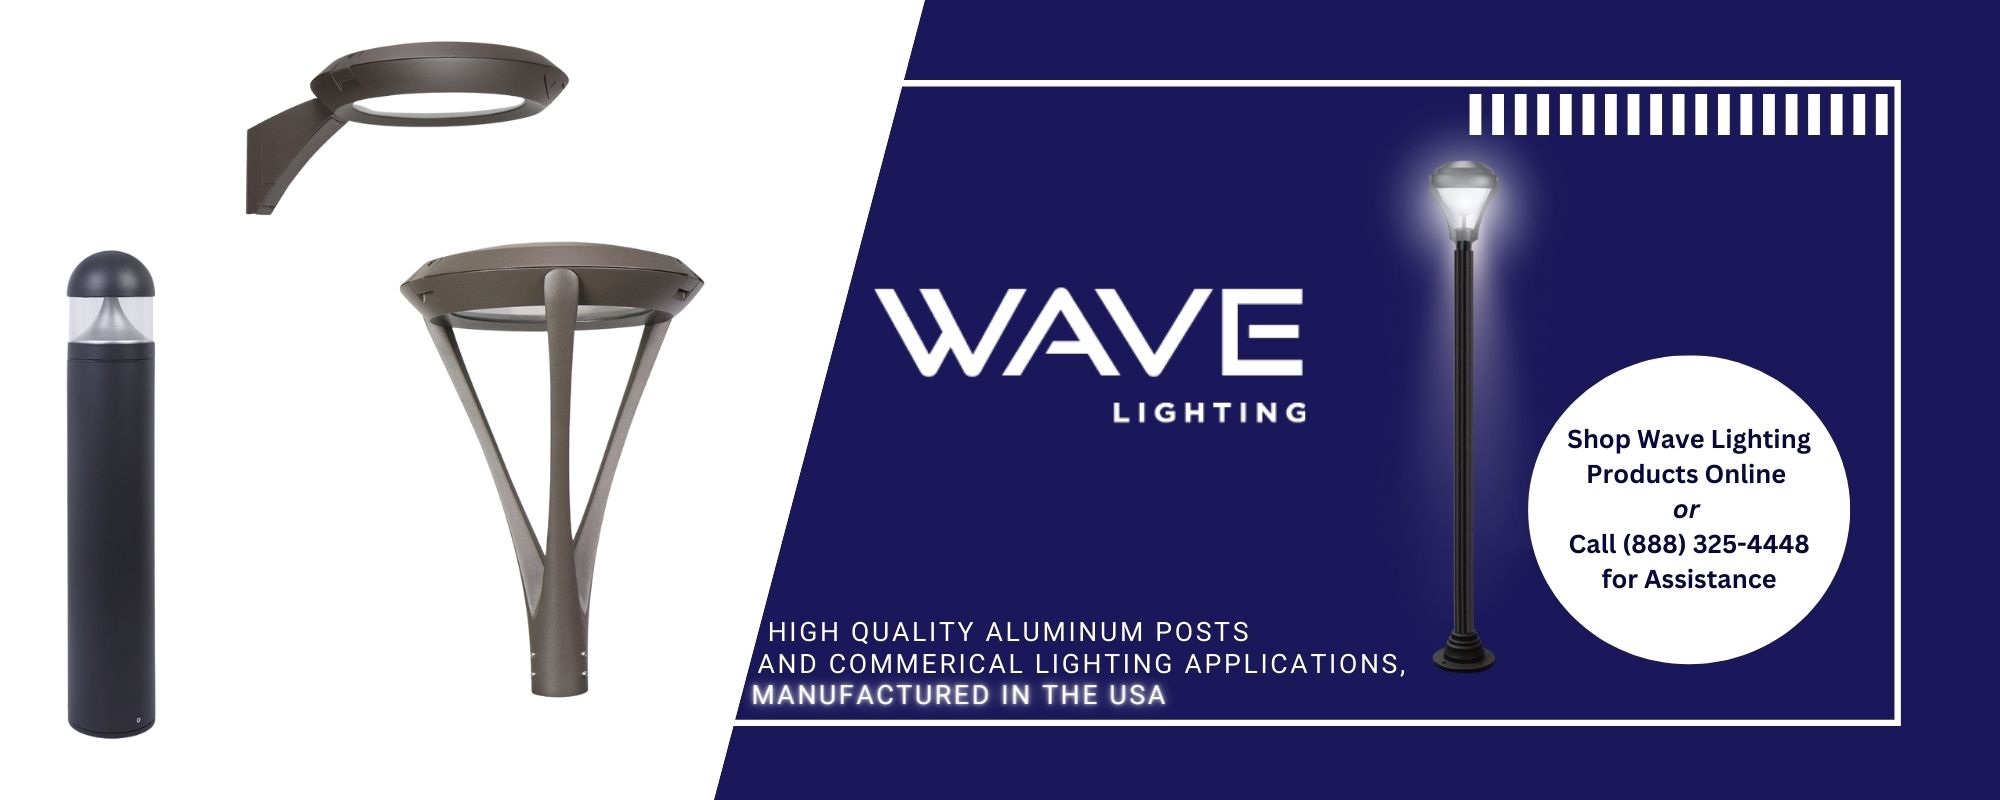 High quality aluminum posts and commercial lighting applications, manufactured in the USA.